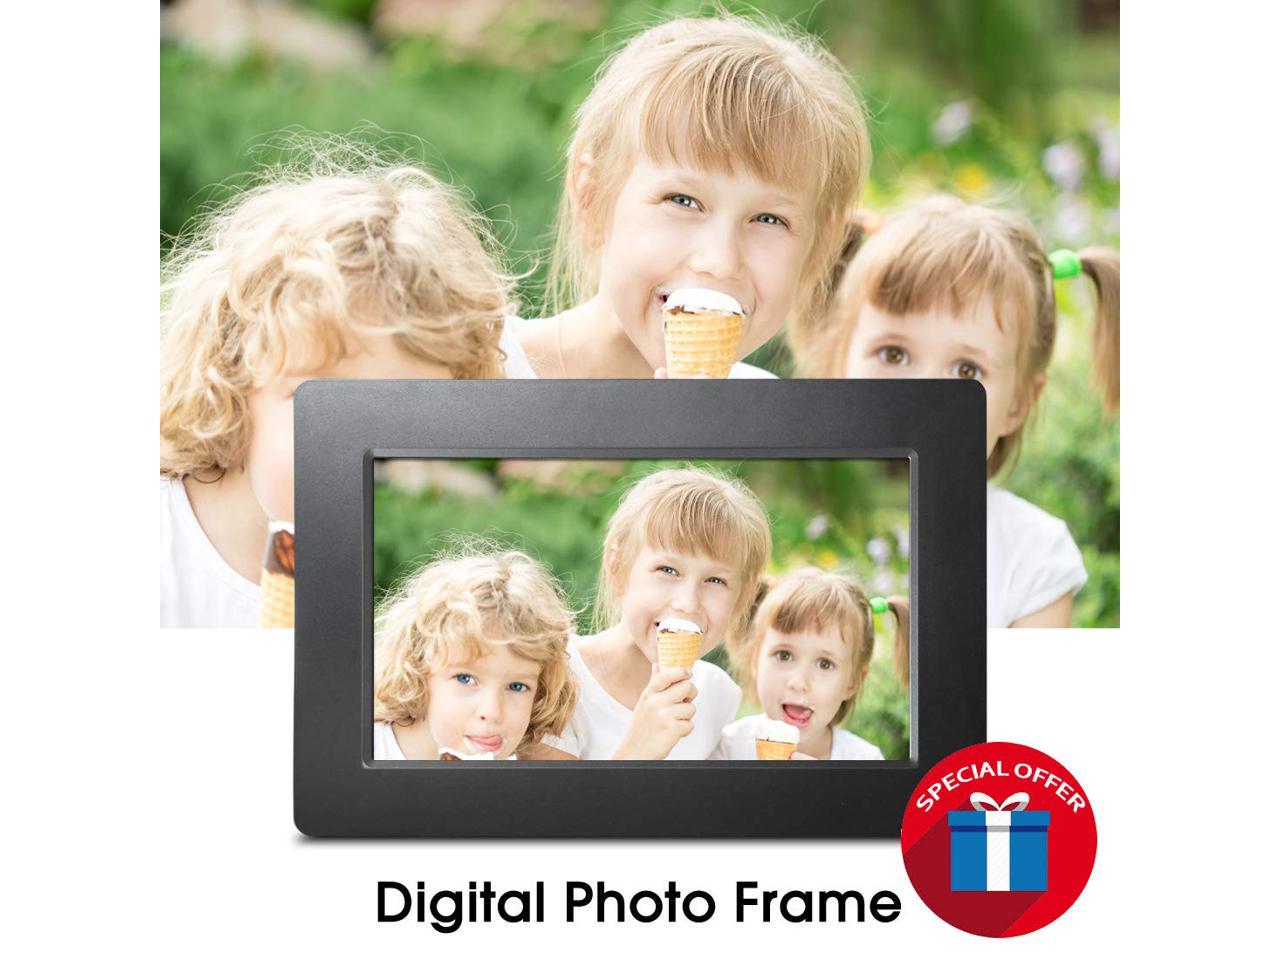 SUNGALE DPF710 - 7 INCH DIGITAL PHOTO FRAME WITH 0.3